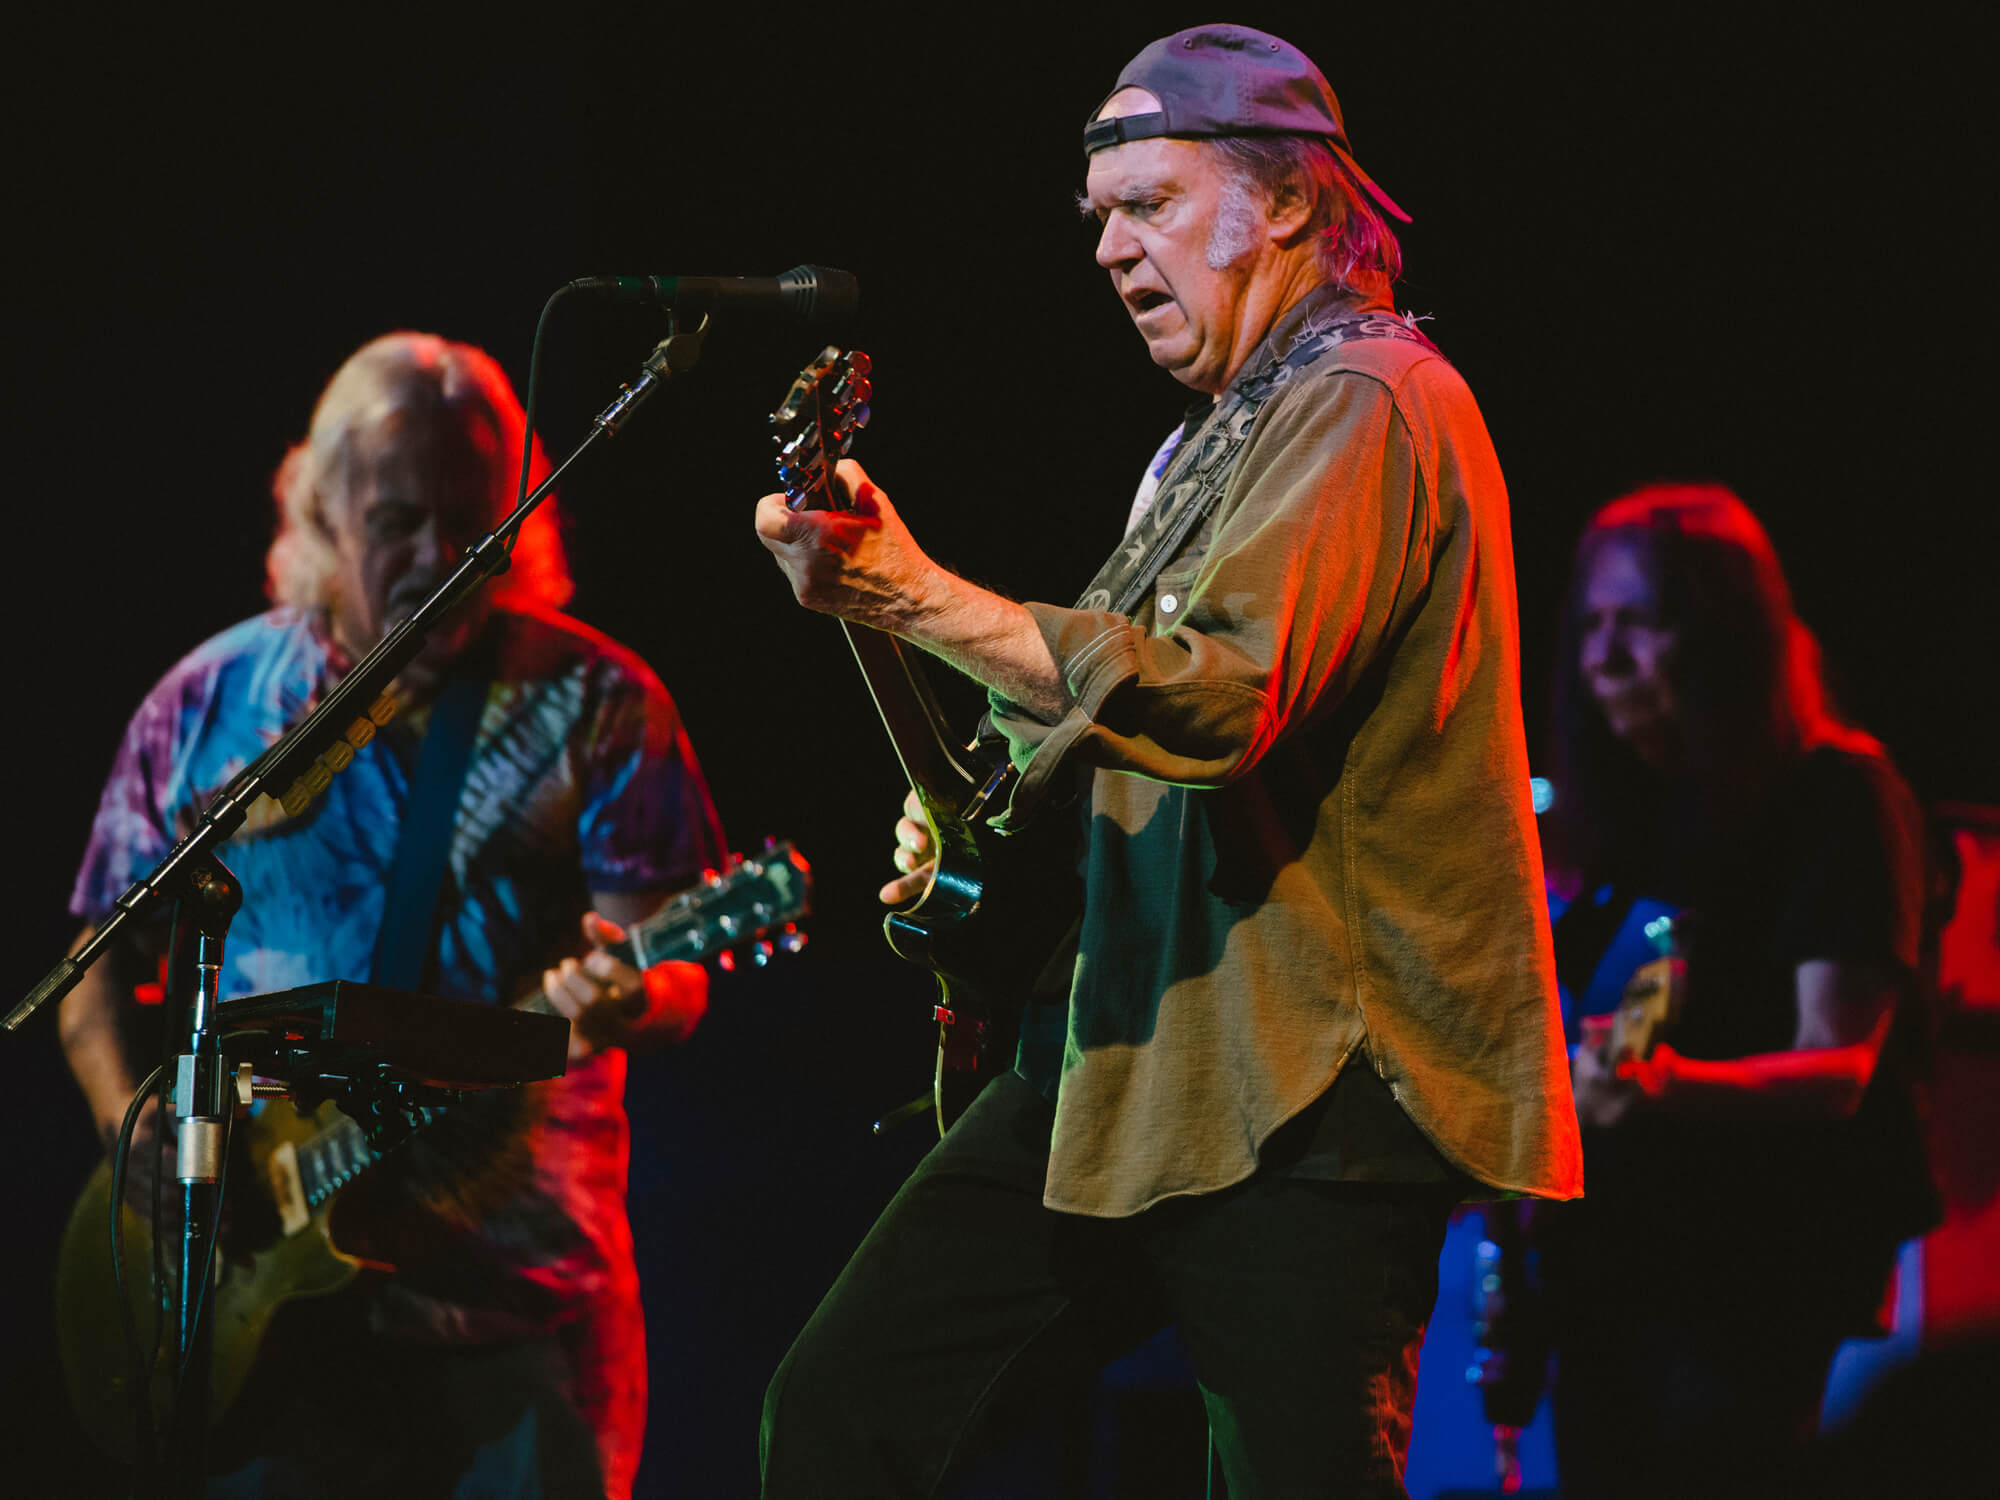 Neil Young & Crazy Horse perform live on stage